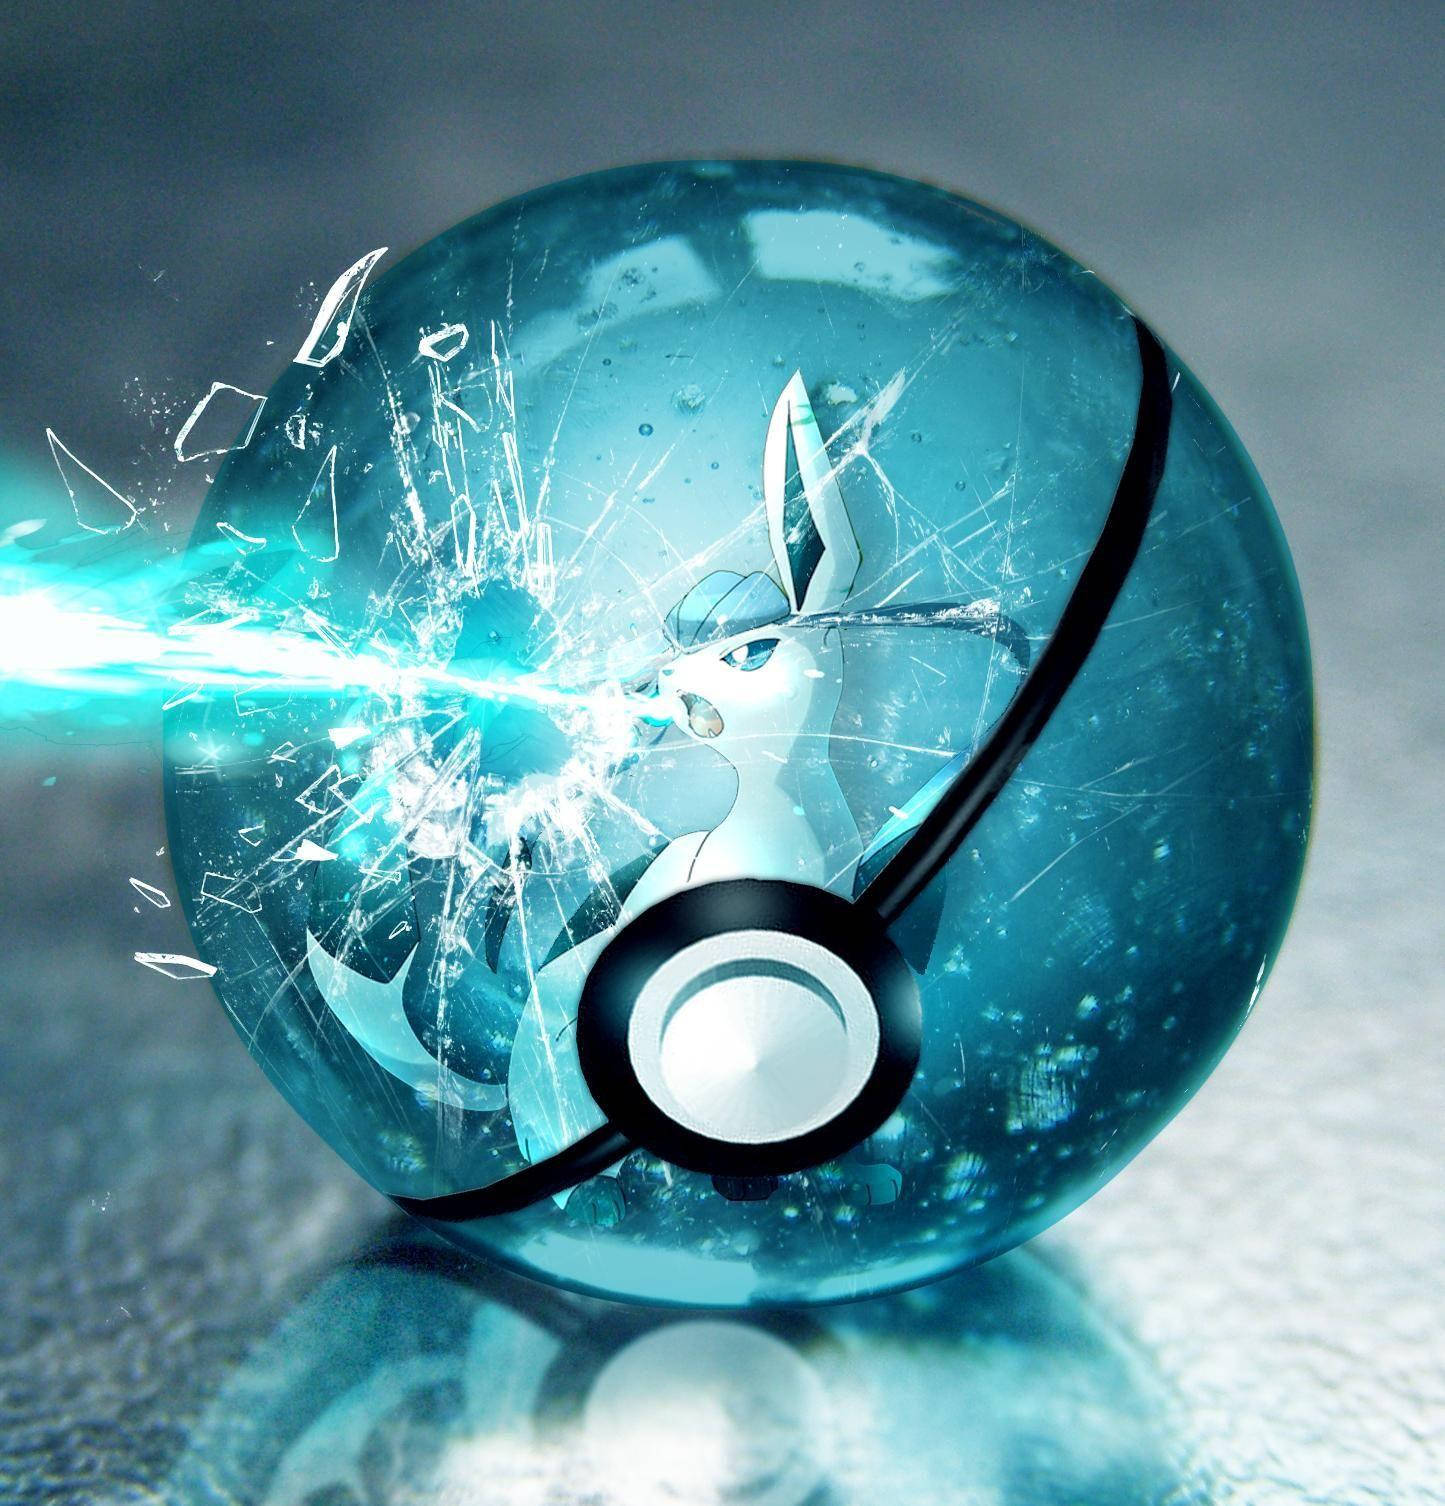 Glaceon Inside a Pokéball - Ready to Battle! Wallpaper